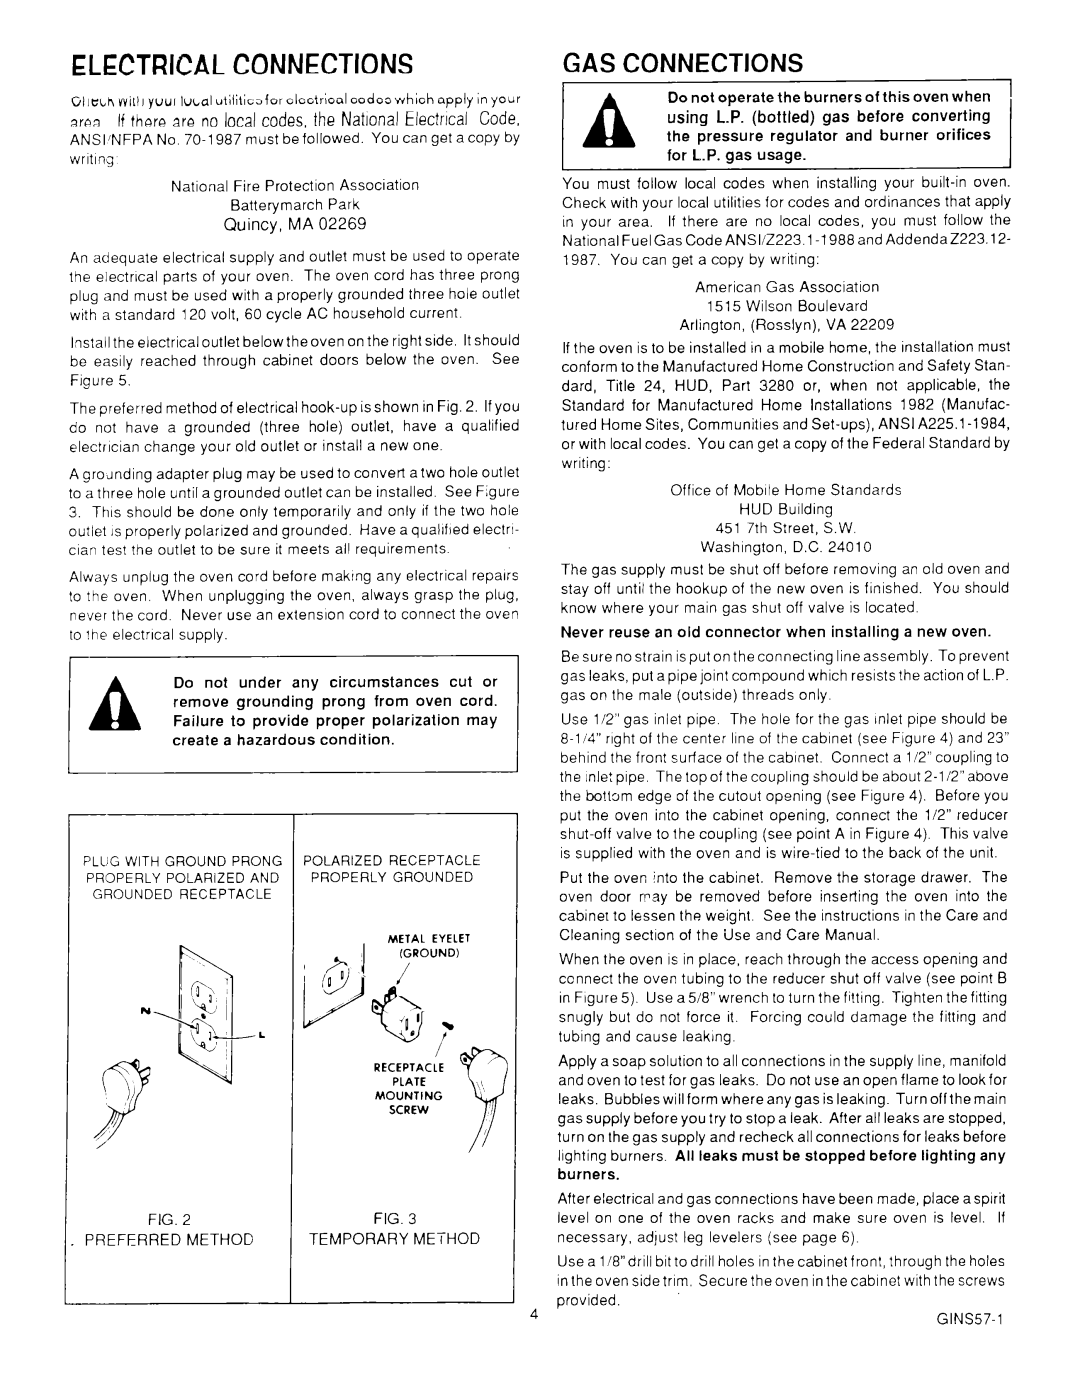 Roper B875, MN11020(344197) manual Gas Connections, ELECTRICALIwalCONNECTIONS 